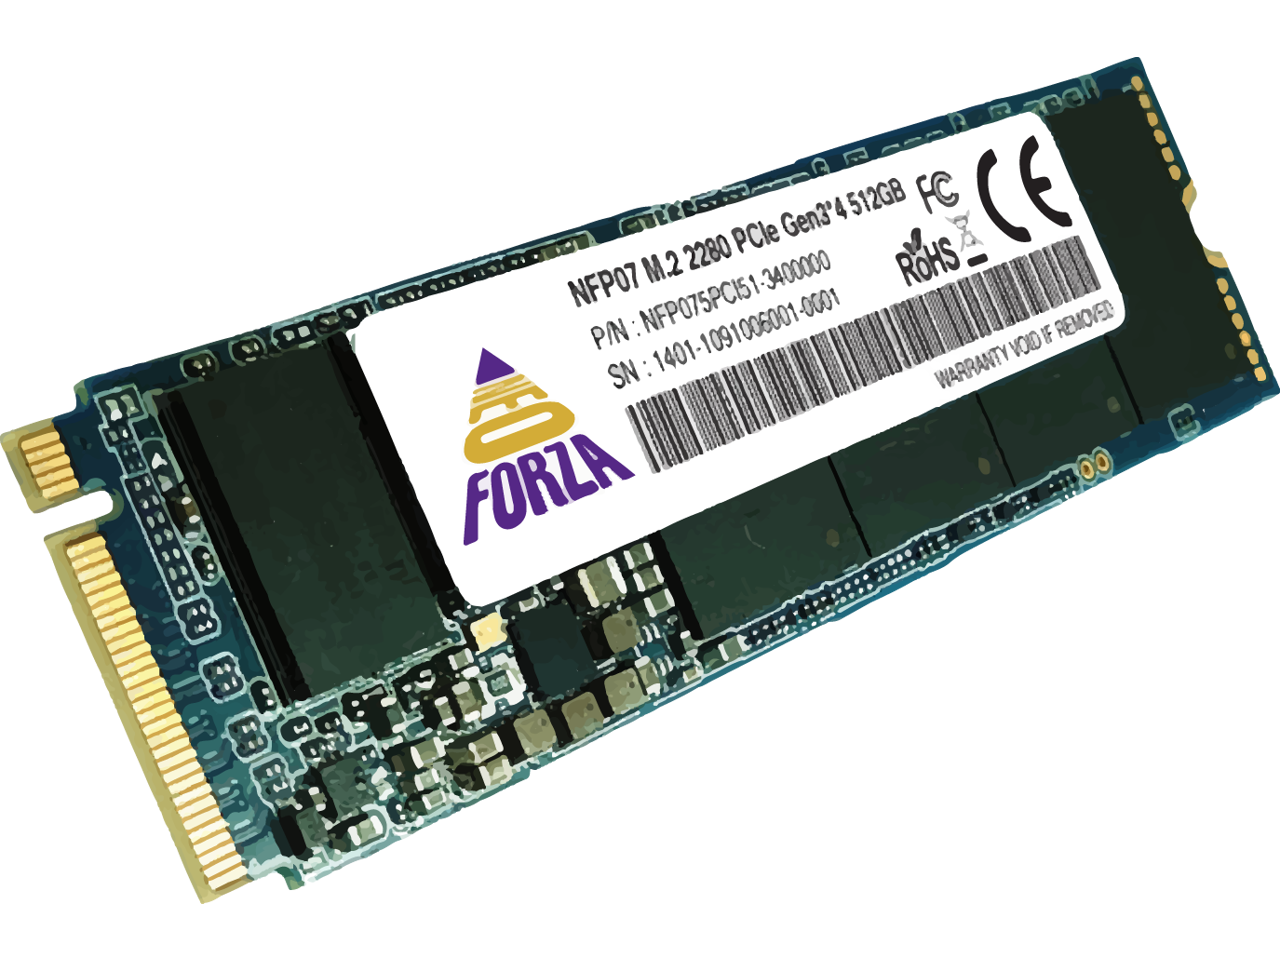 Neo Forza eSports 3400MB/s 512GB M.2 PCIe Internal SSD DRAM cache Solid State Drive for On-demand Intensive Applications (NFP075PCI51-3400200) for $64.99 w/ Free Shipping